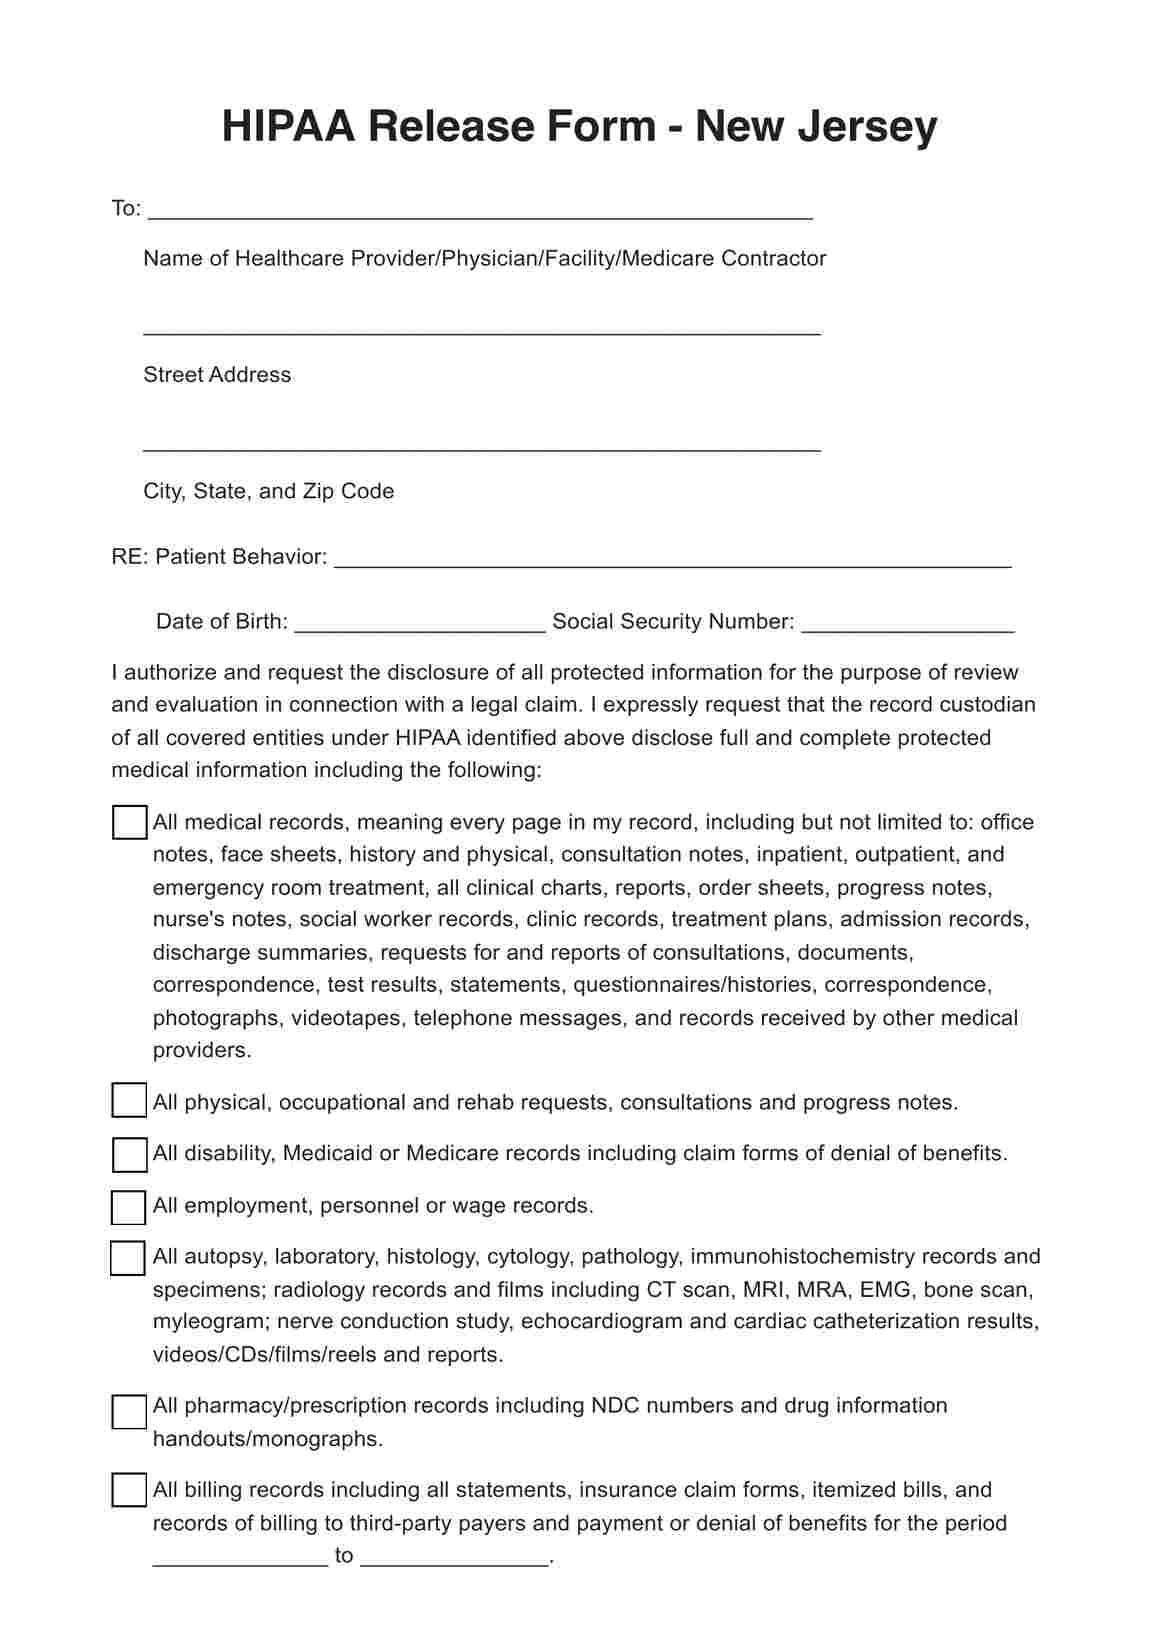 HIPAA Release Form New Jersey PDF Example